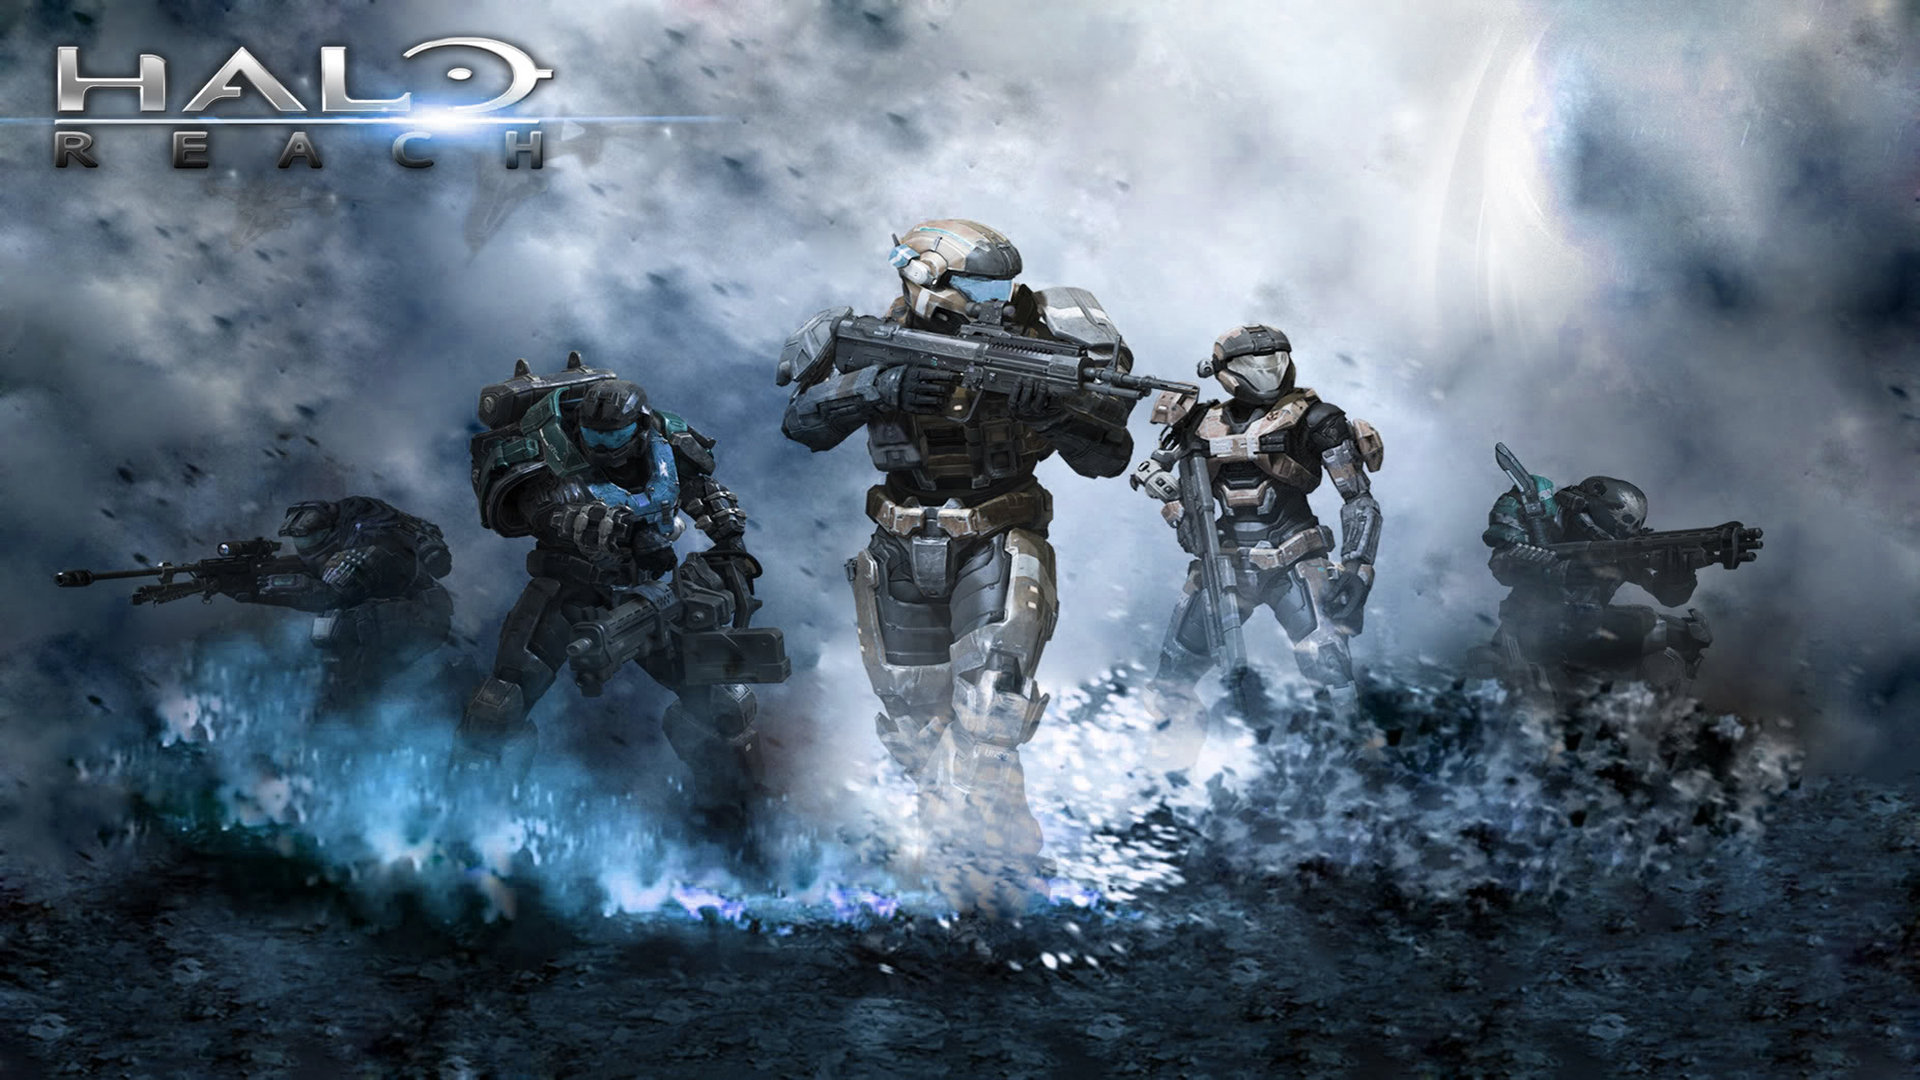 Halo Wallpaper HD free download | Wallpapers, Backgrounds, Images ...